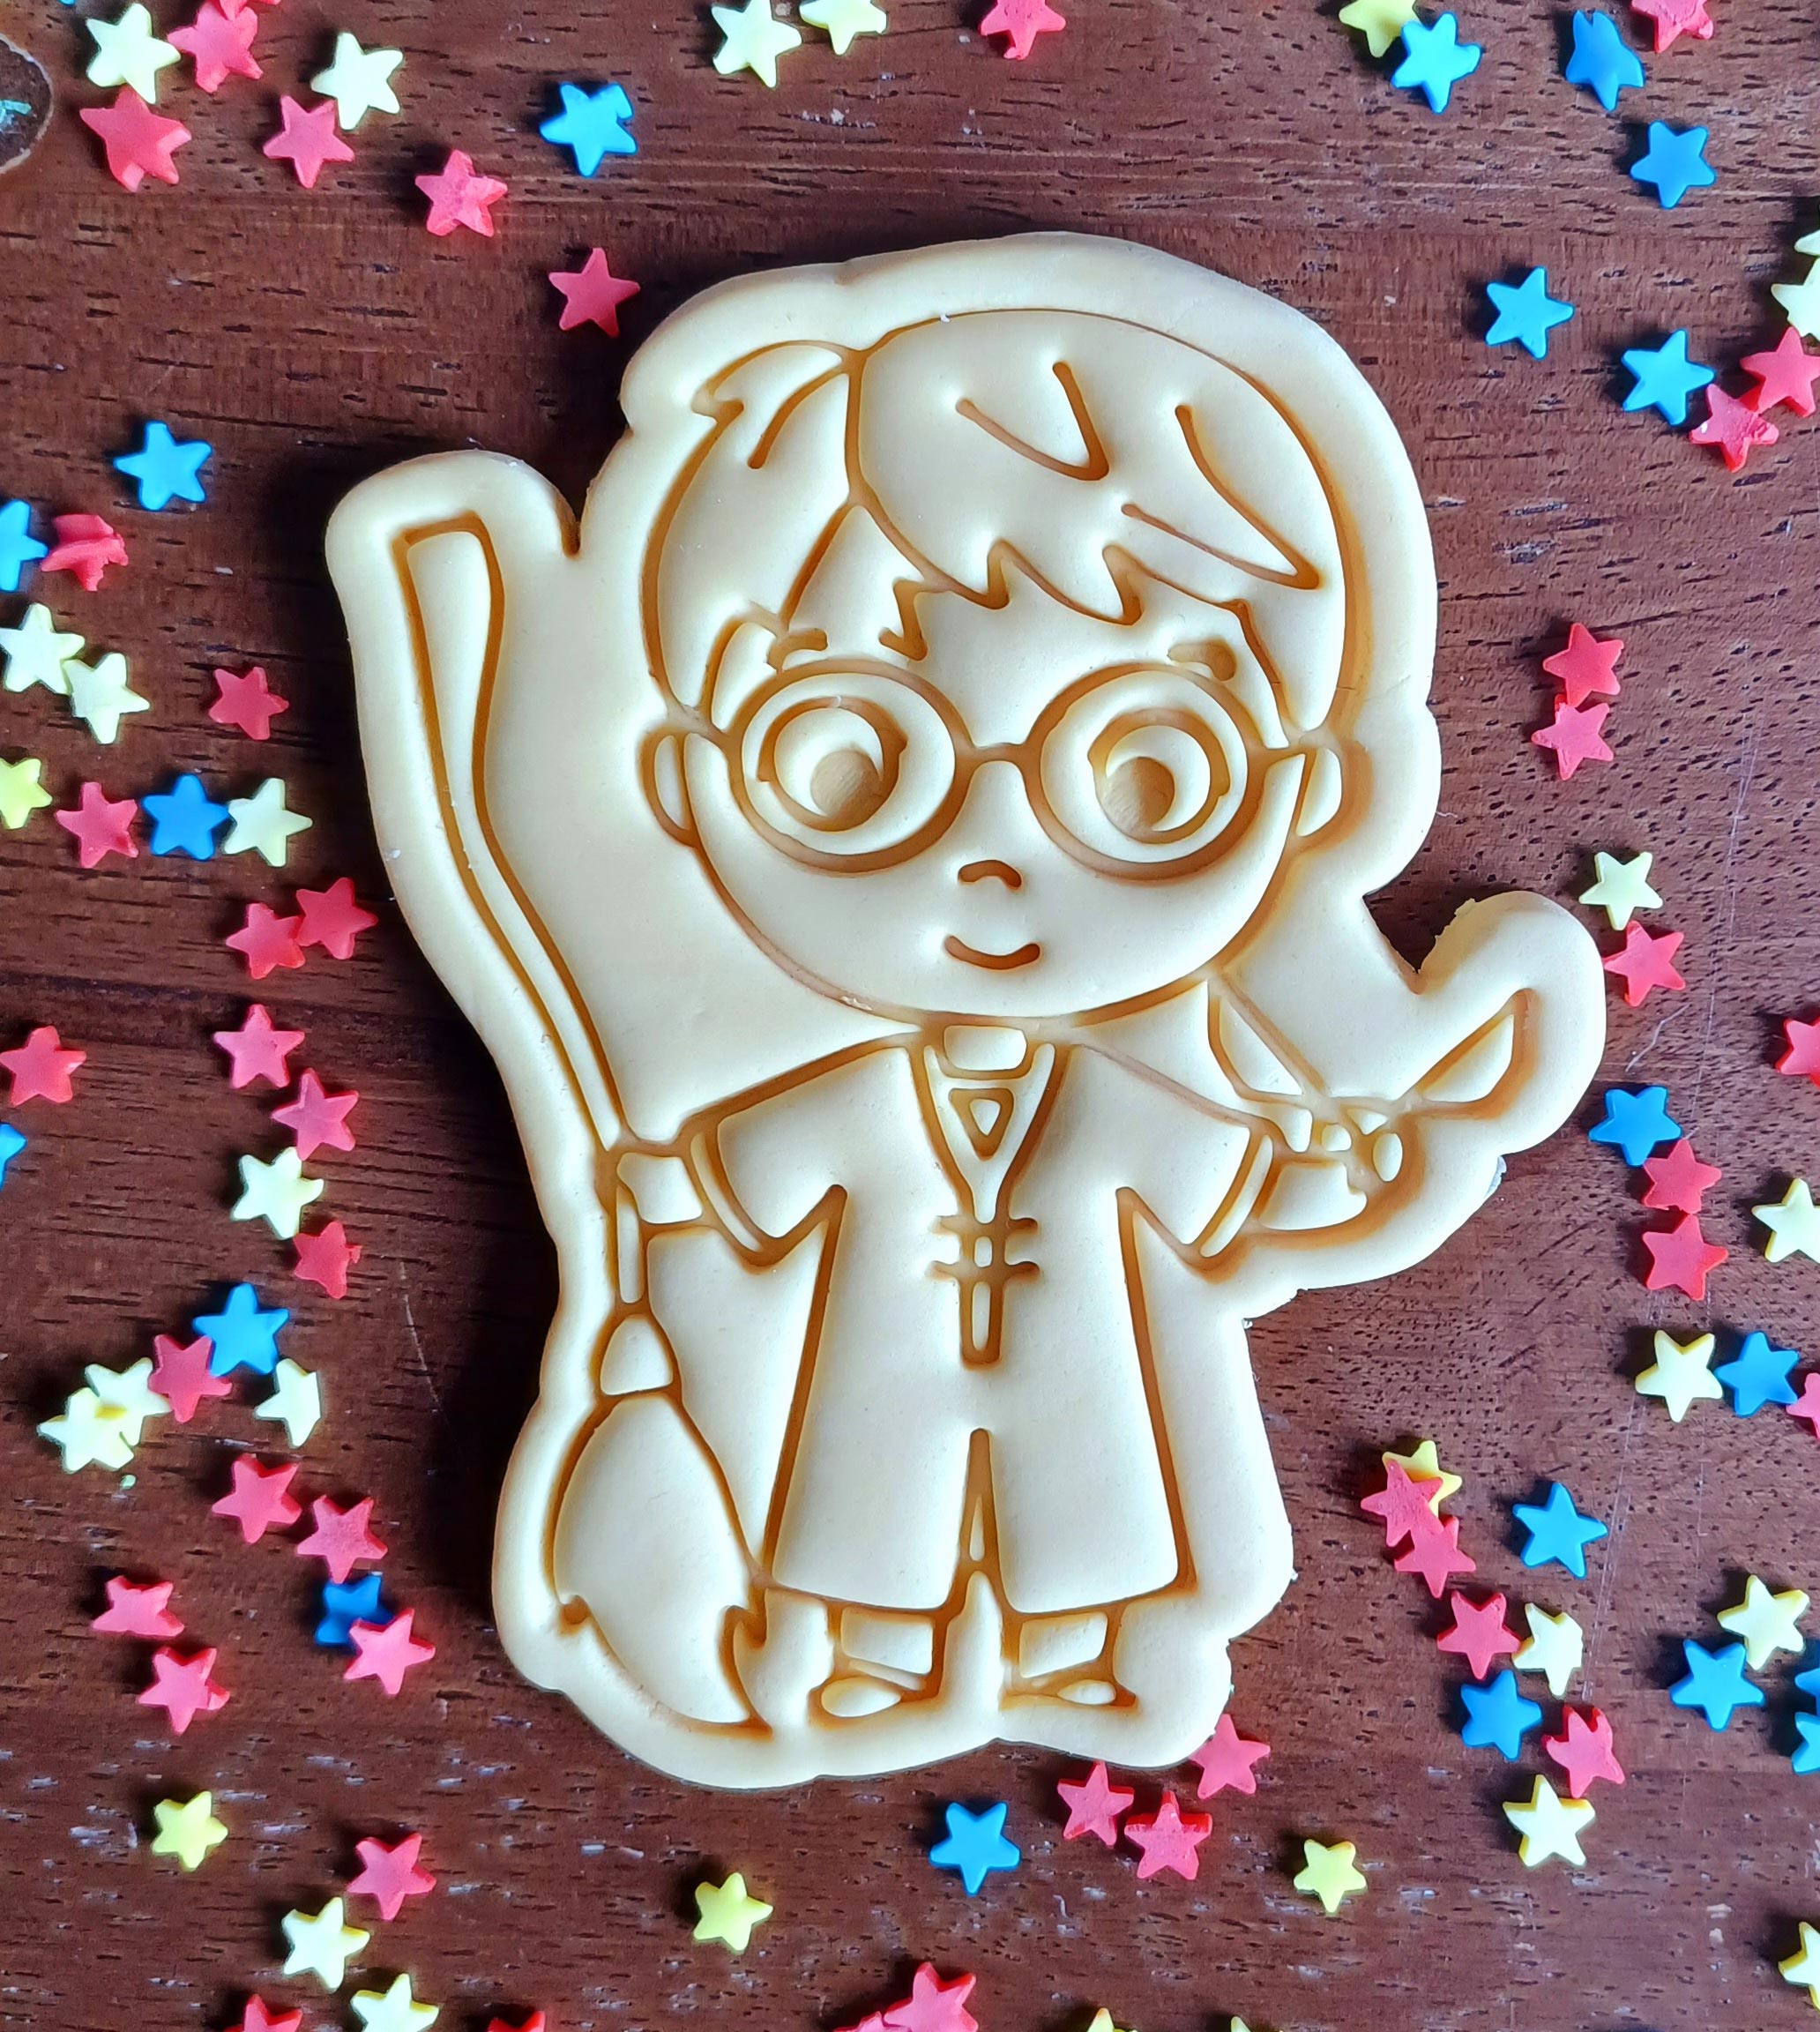 Harry Potter cookie cutters - Cookies